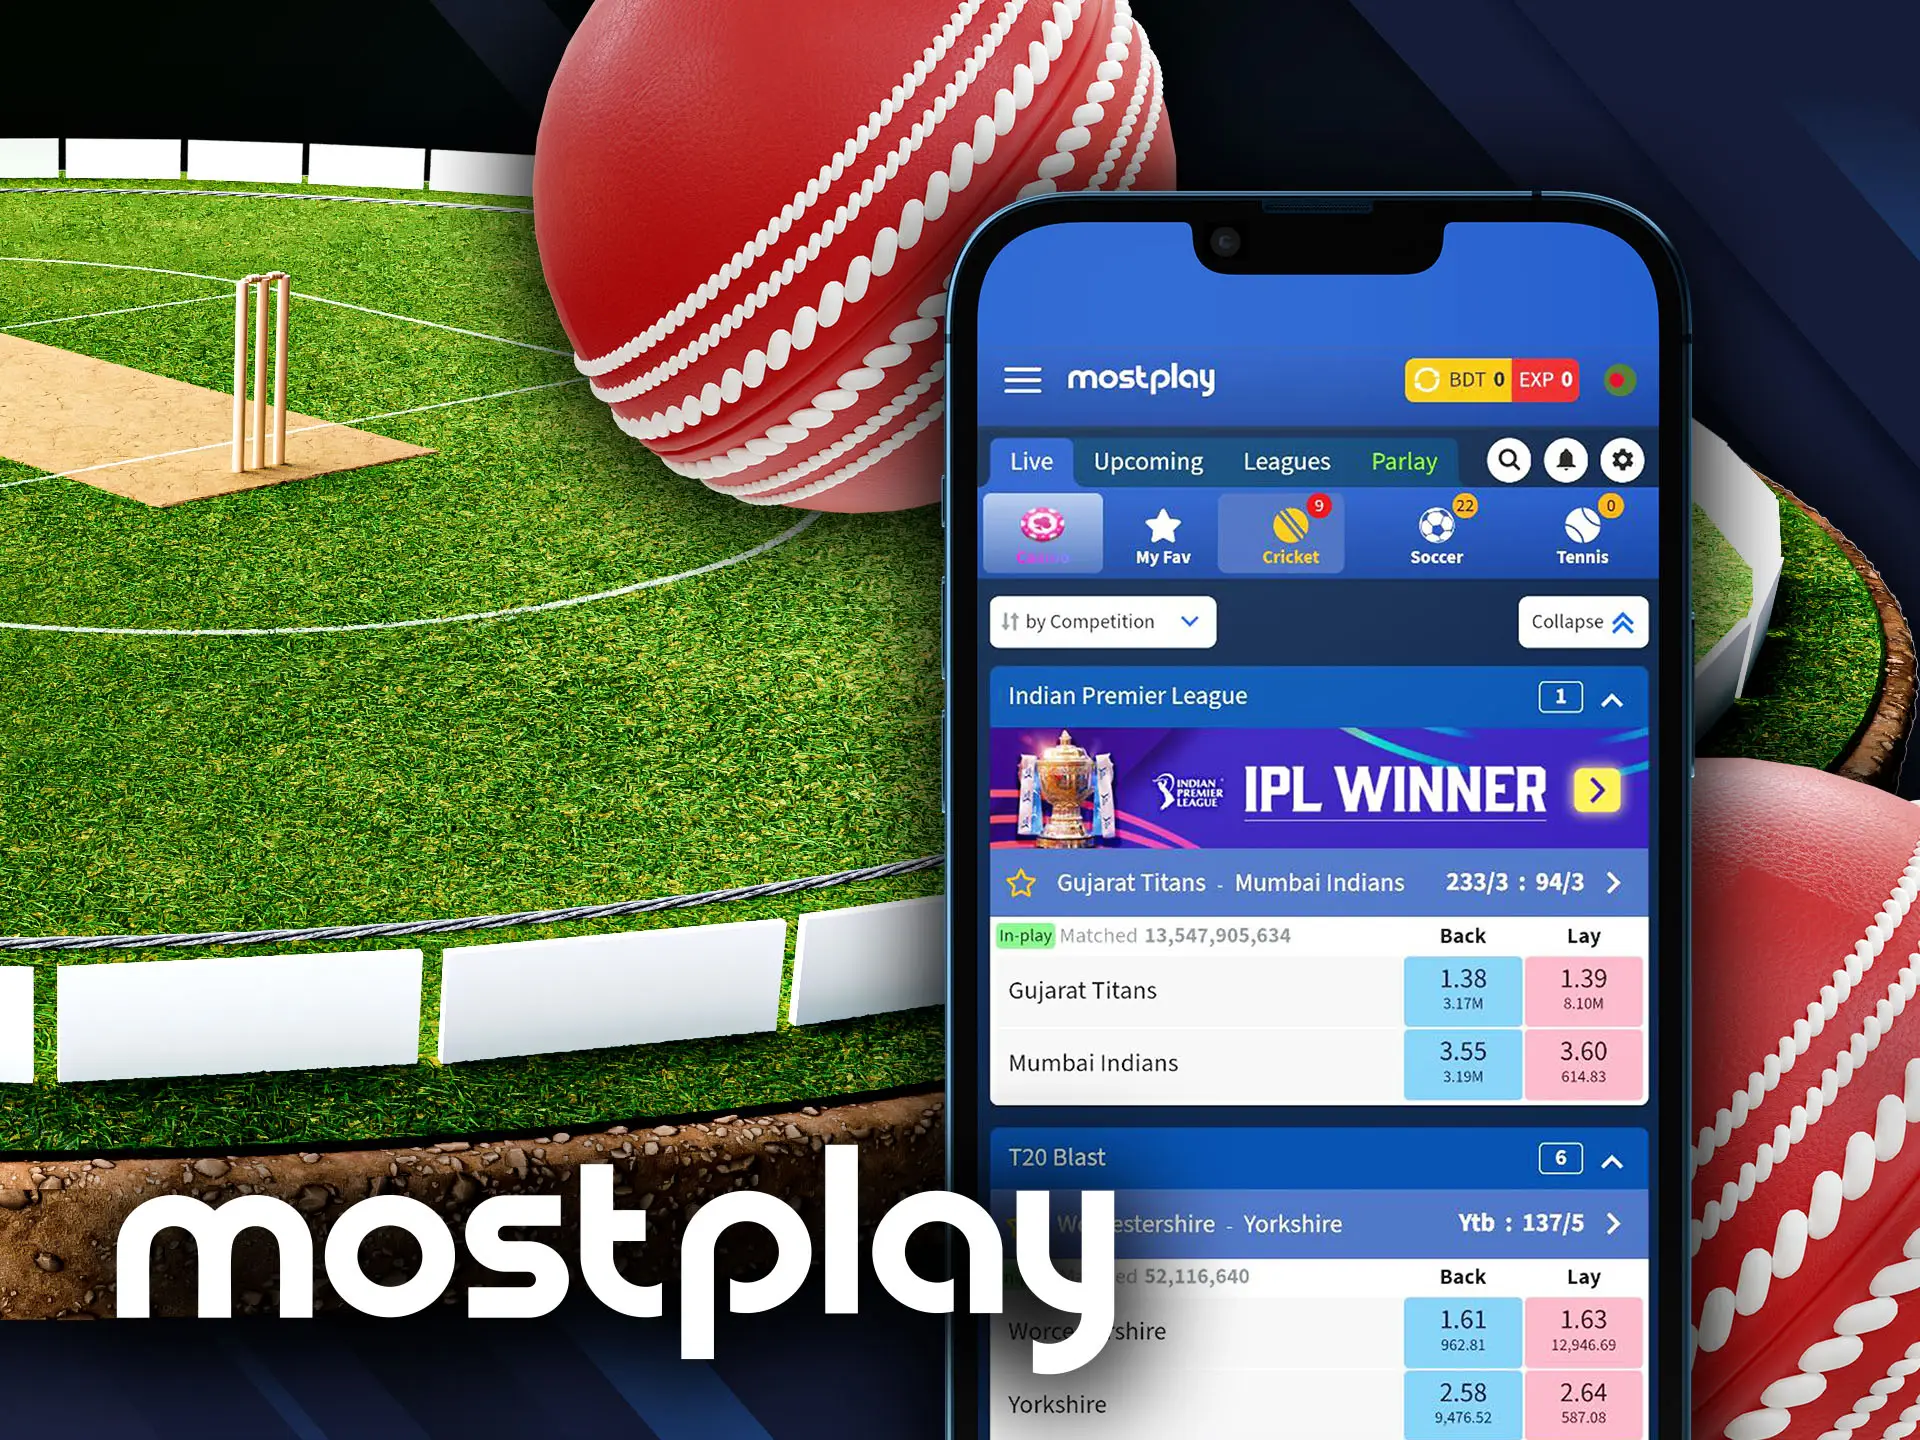 Bet on cricket matches on Mostplay sports page.